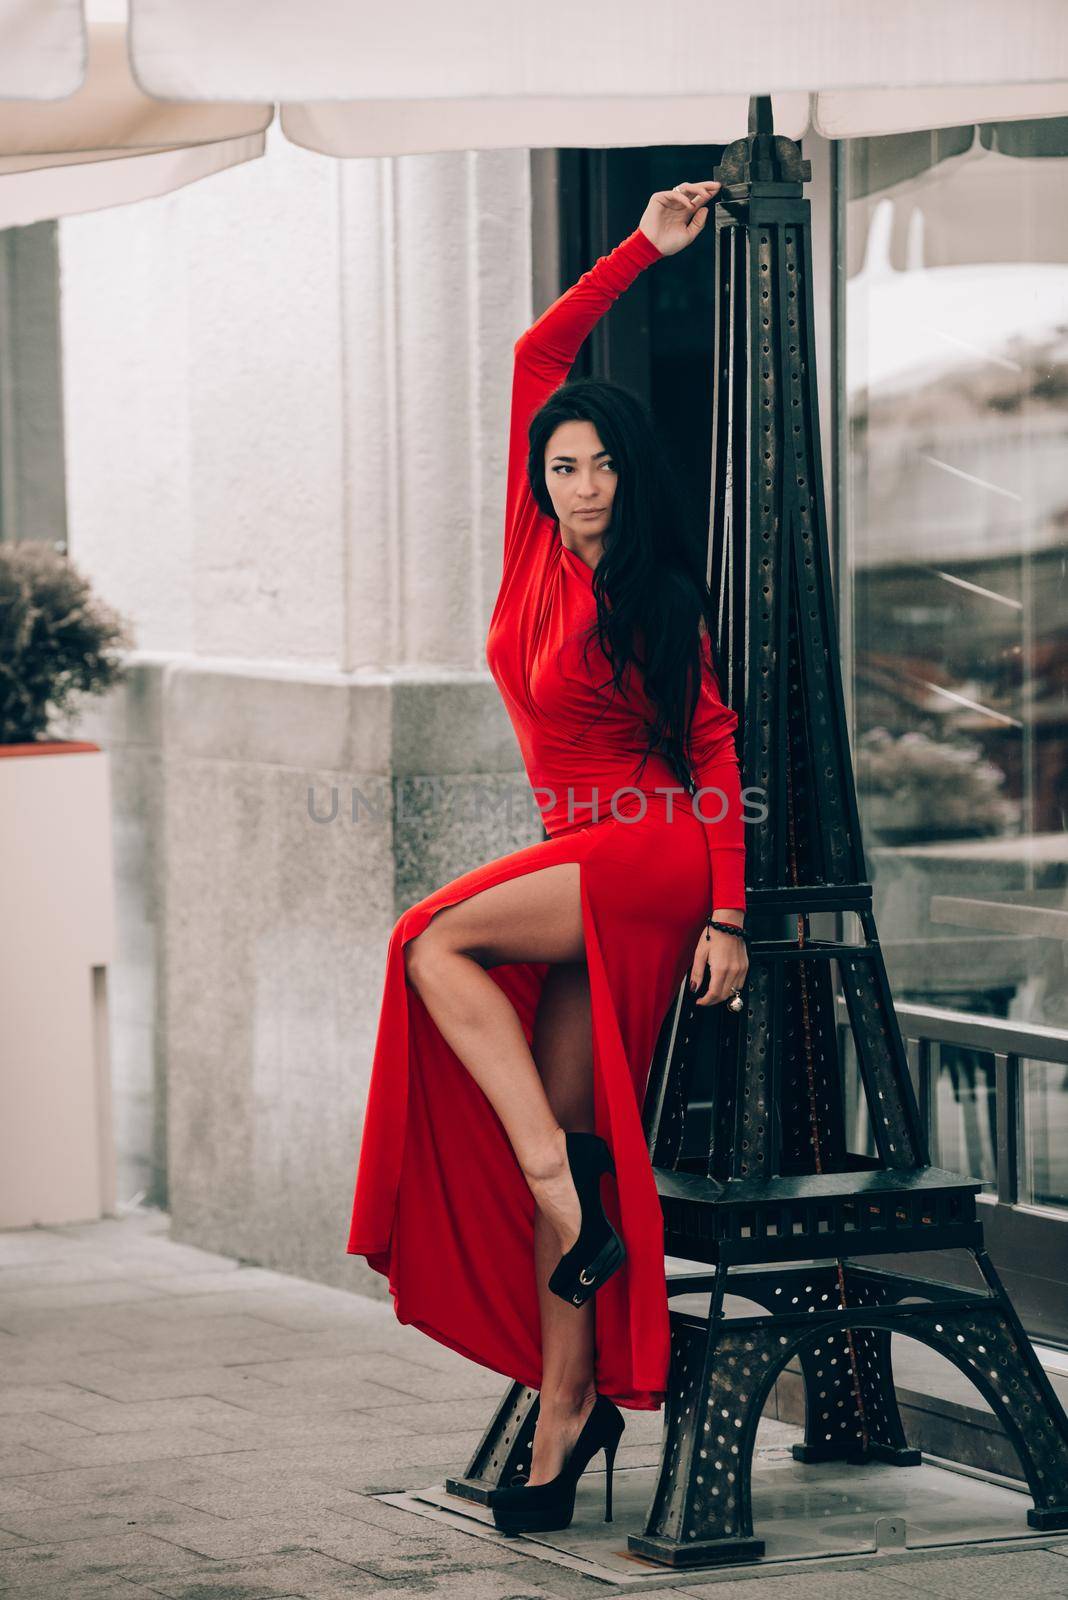 Charming young woman in red sexy dress posing . photo of a seductive woman with black hair near decorative tower. Selective focus